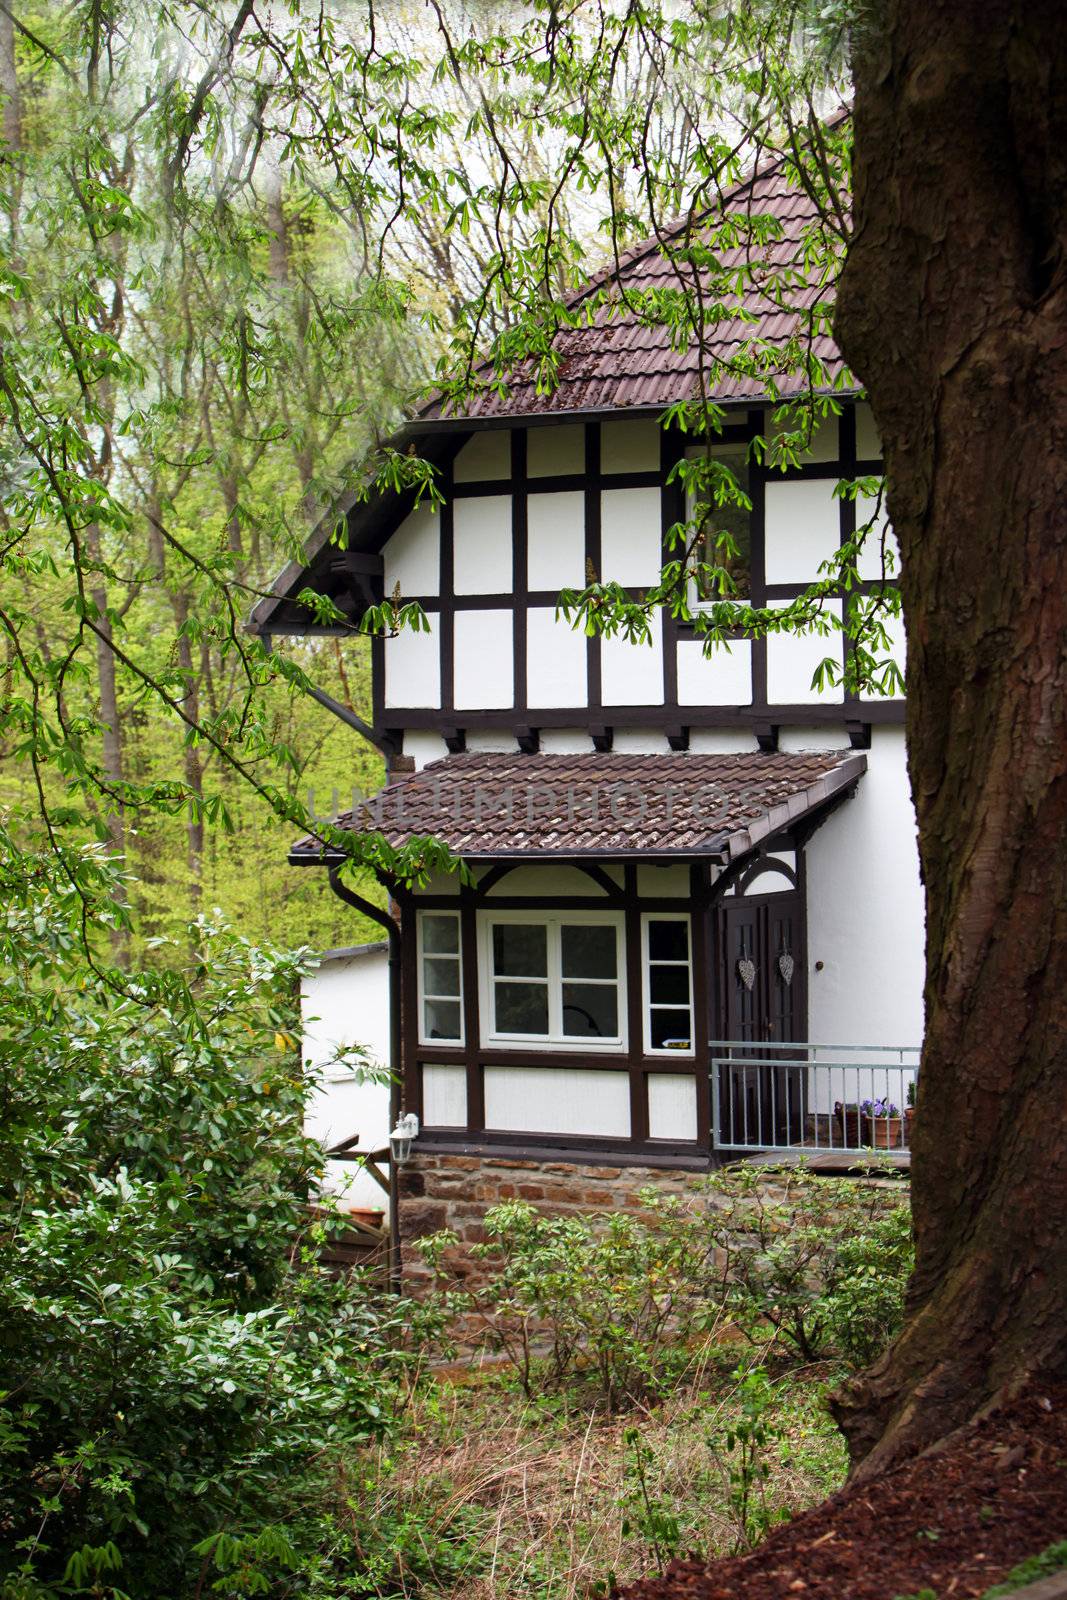 Quaint half timber frame house in the Tudor style nestling amongst trees and greenery